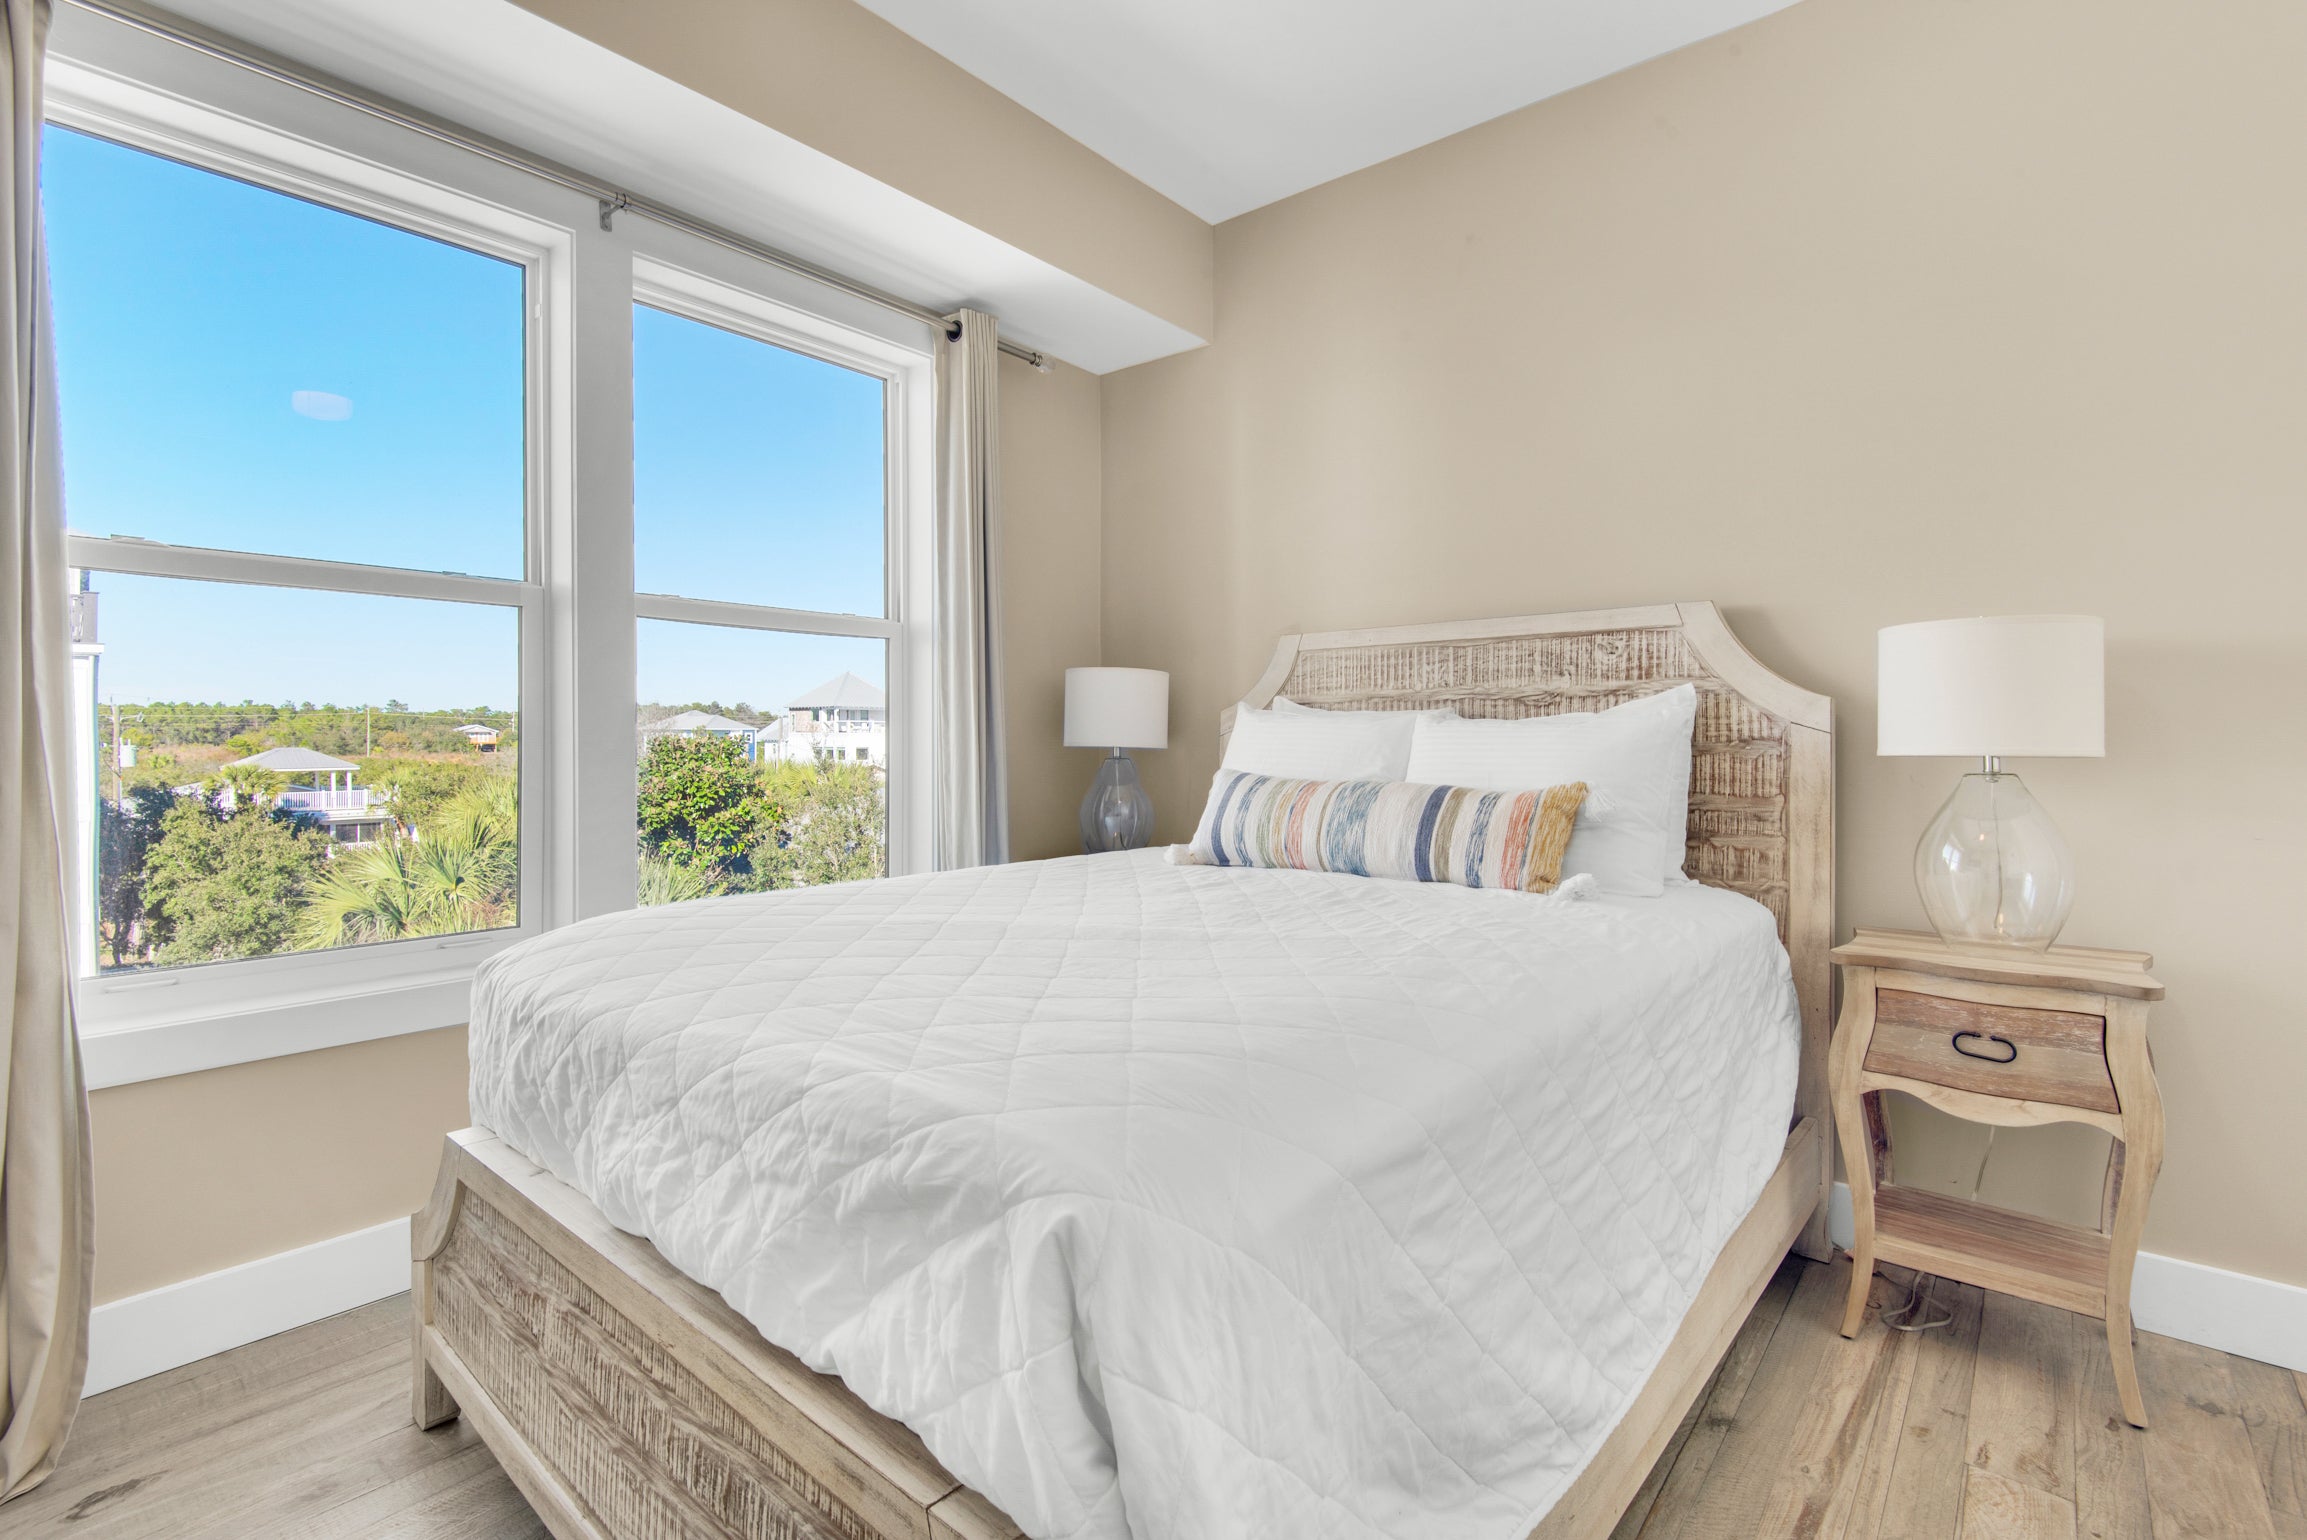 Guest bedroom with great views